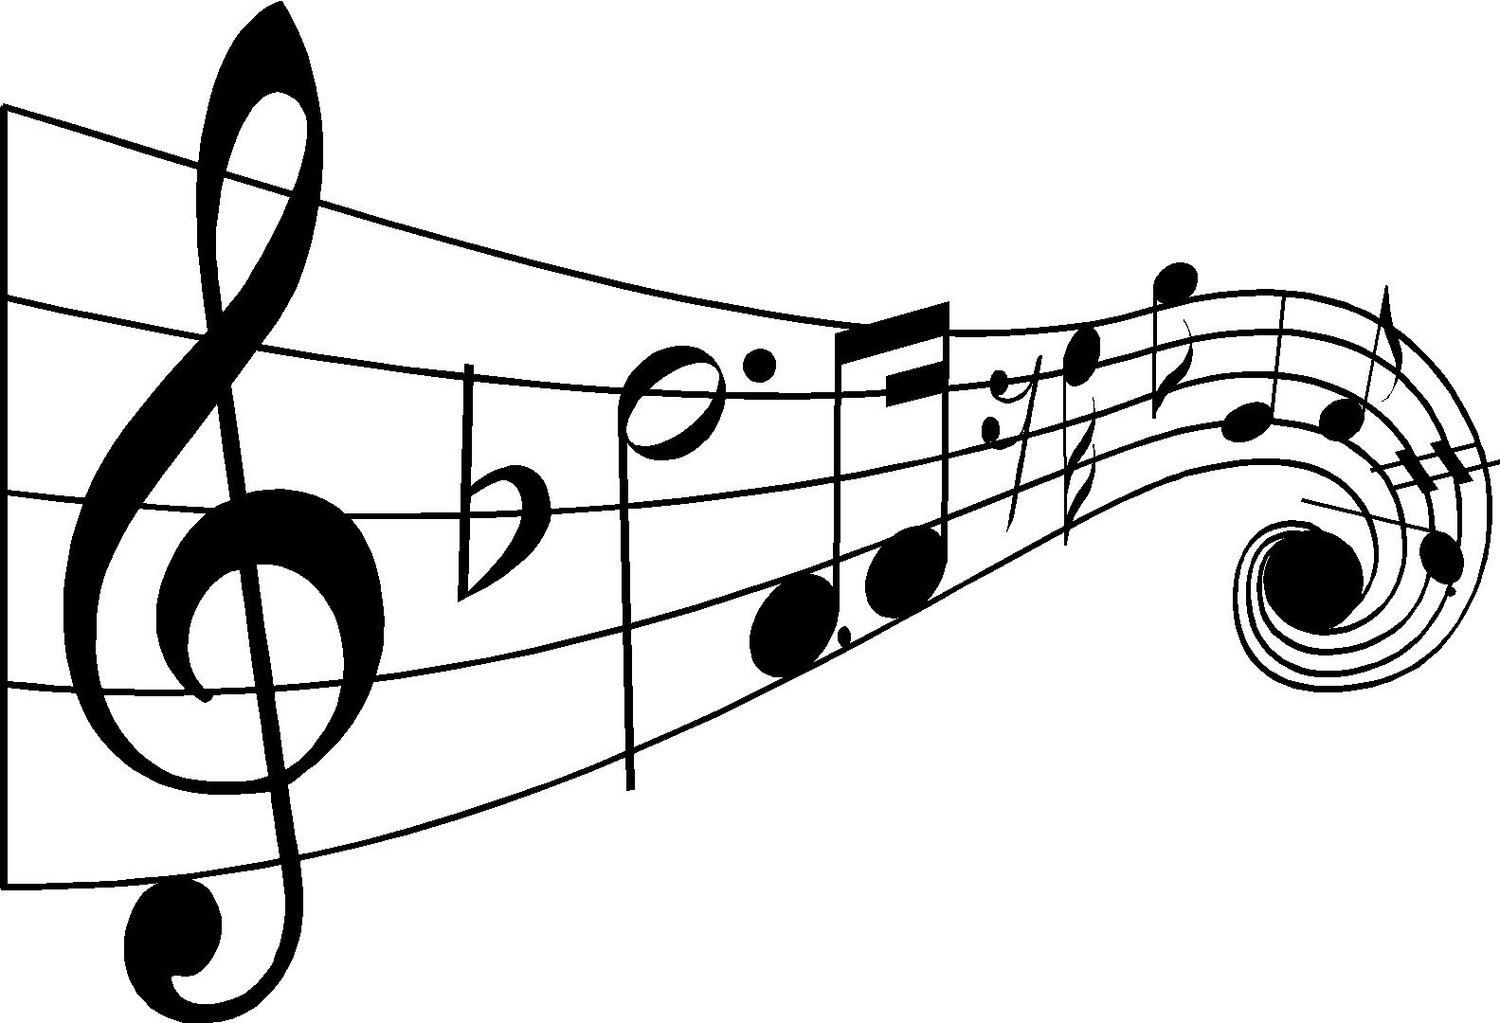 Free Black And White Music Picture, Download Free Clip Art, Free Clip Art on Clipart Library